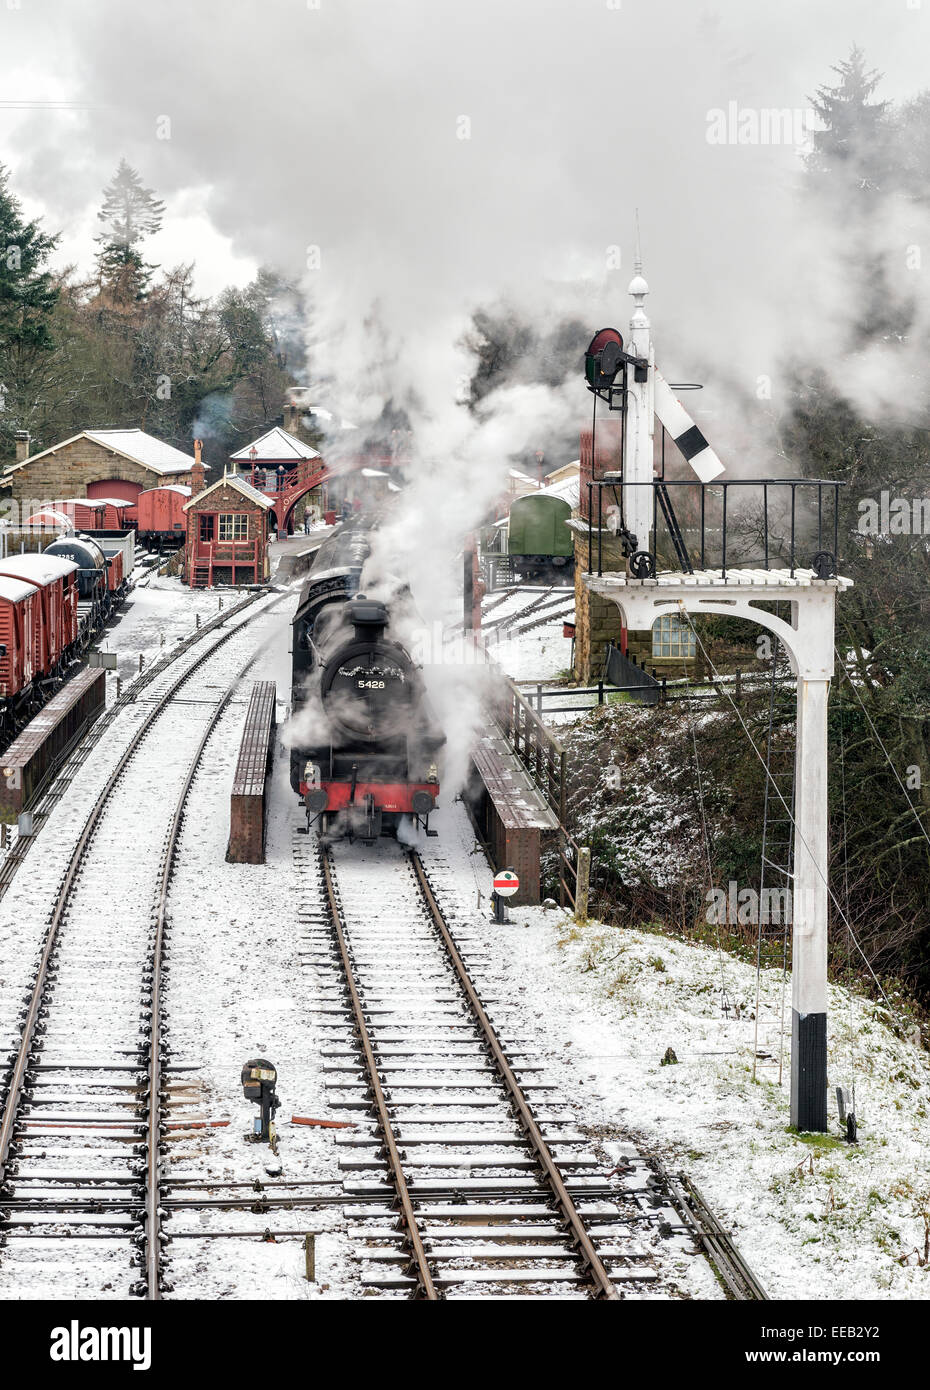 A train at Goathland station on the North York Moors Railway Stock Photo